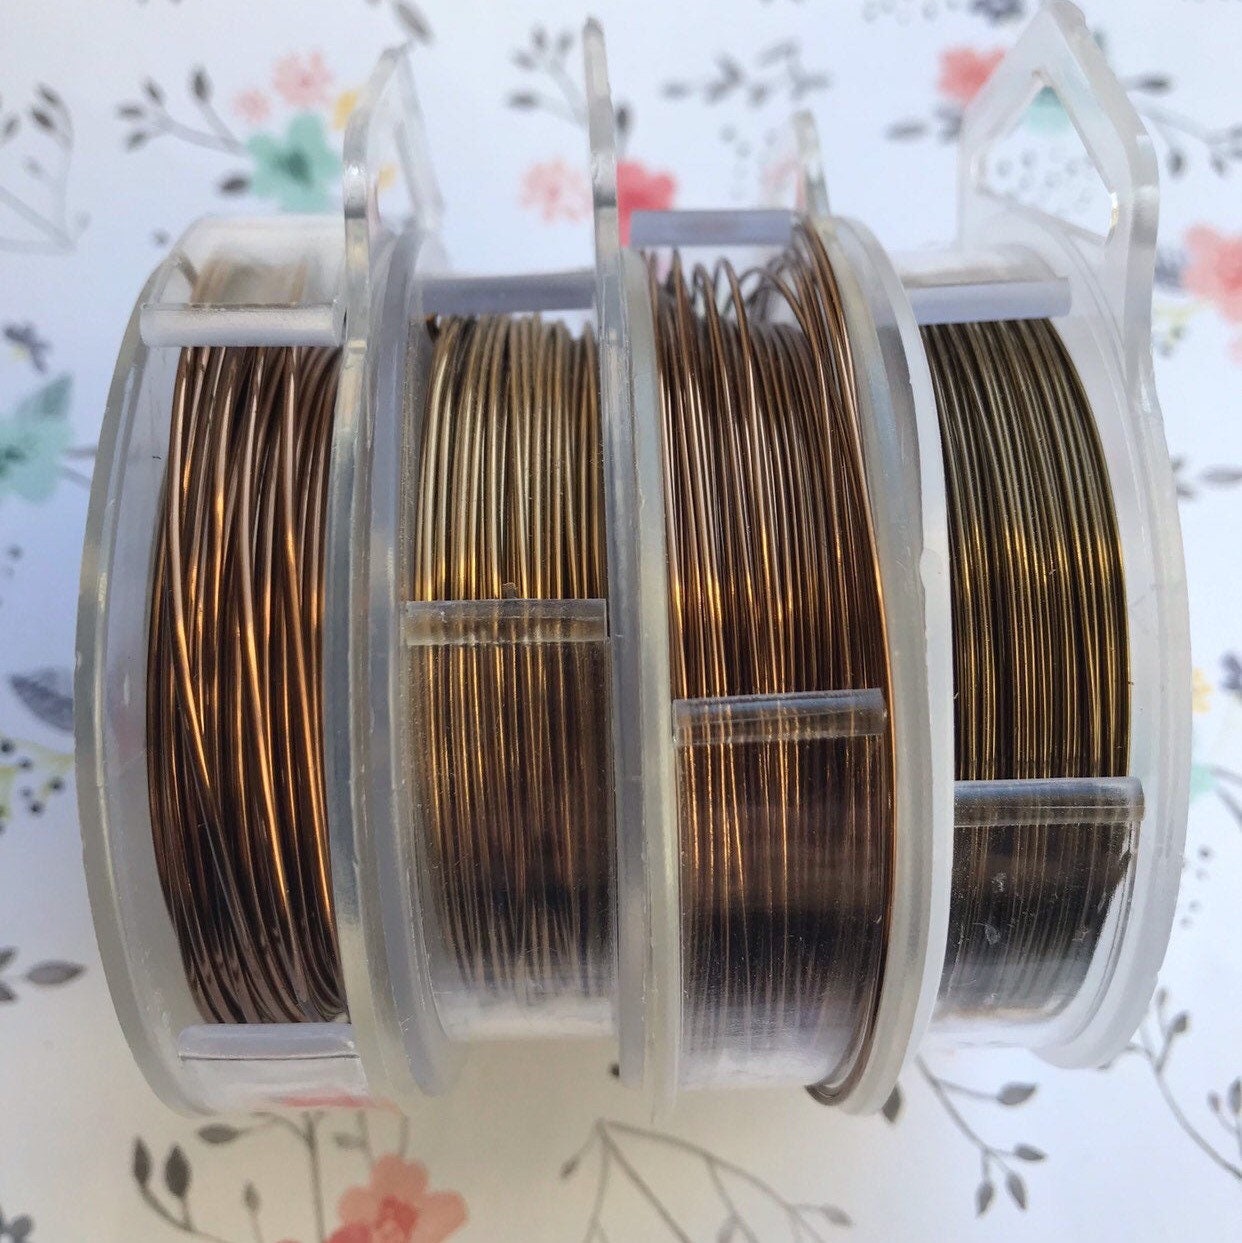 VR HANDCRAFTS 100pcs ( Silver AND GOLDEM ) Flexible Metal Wire/Craft Wire  (Easy to Cut!) for